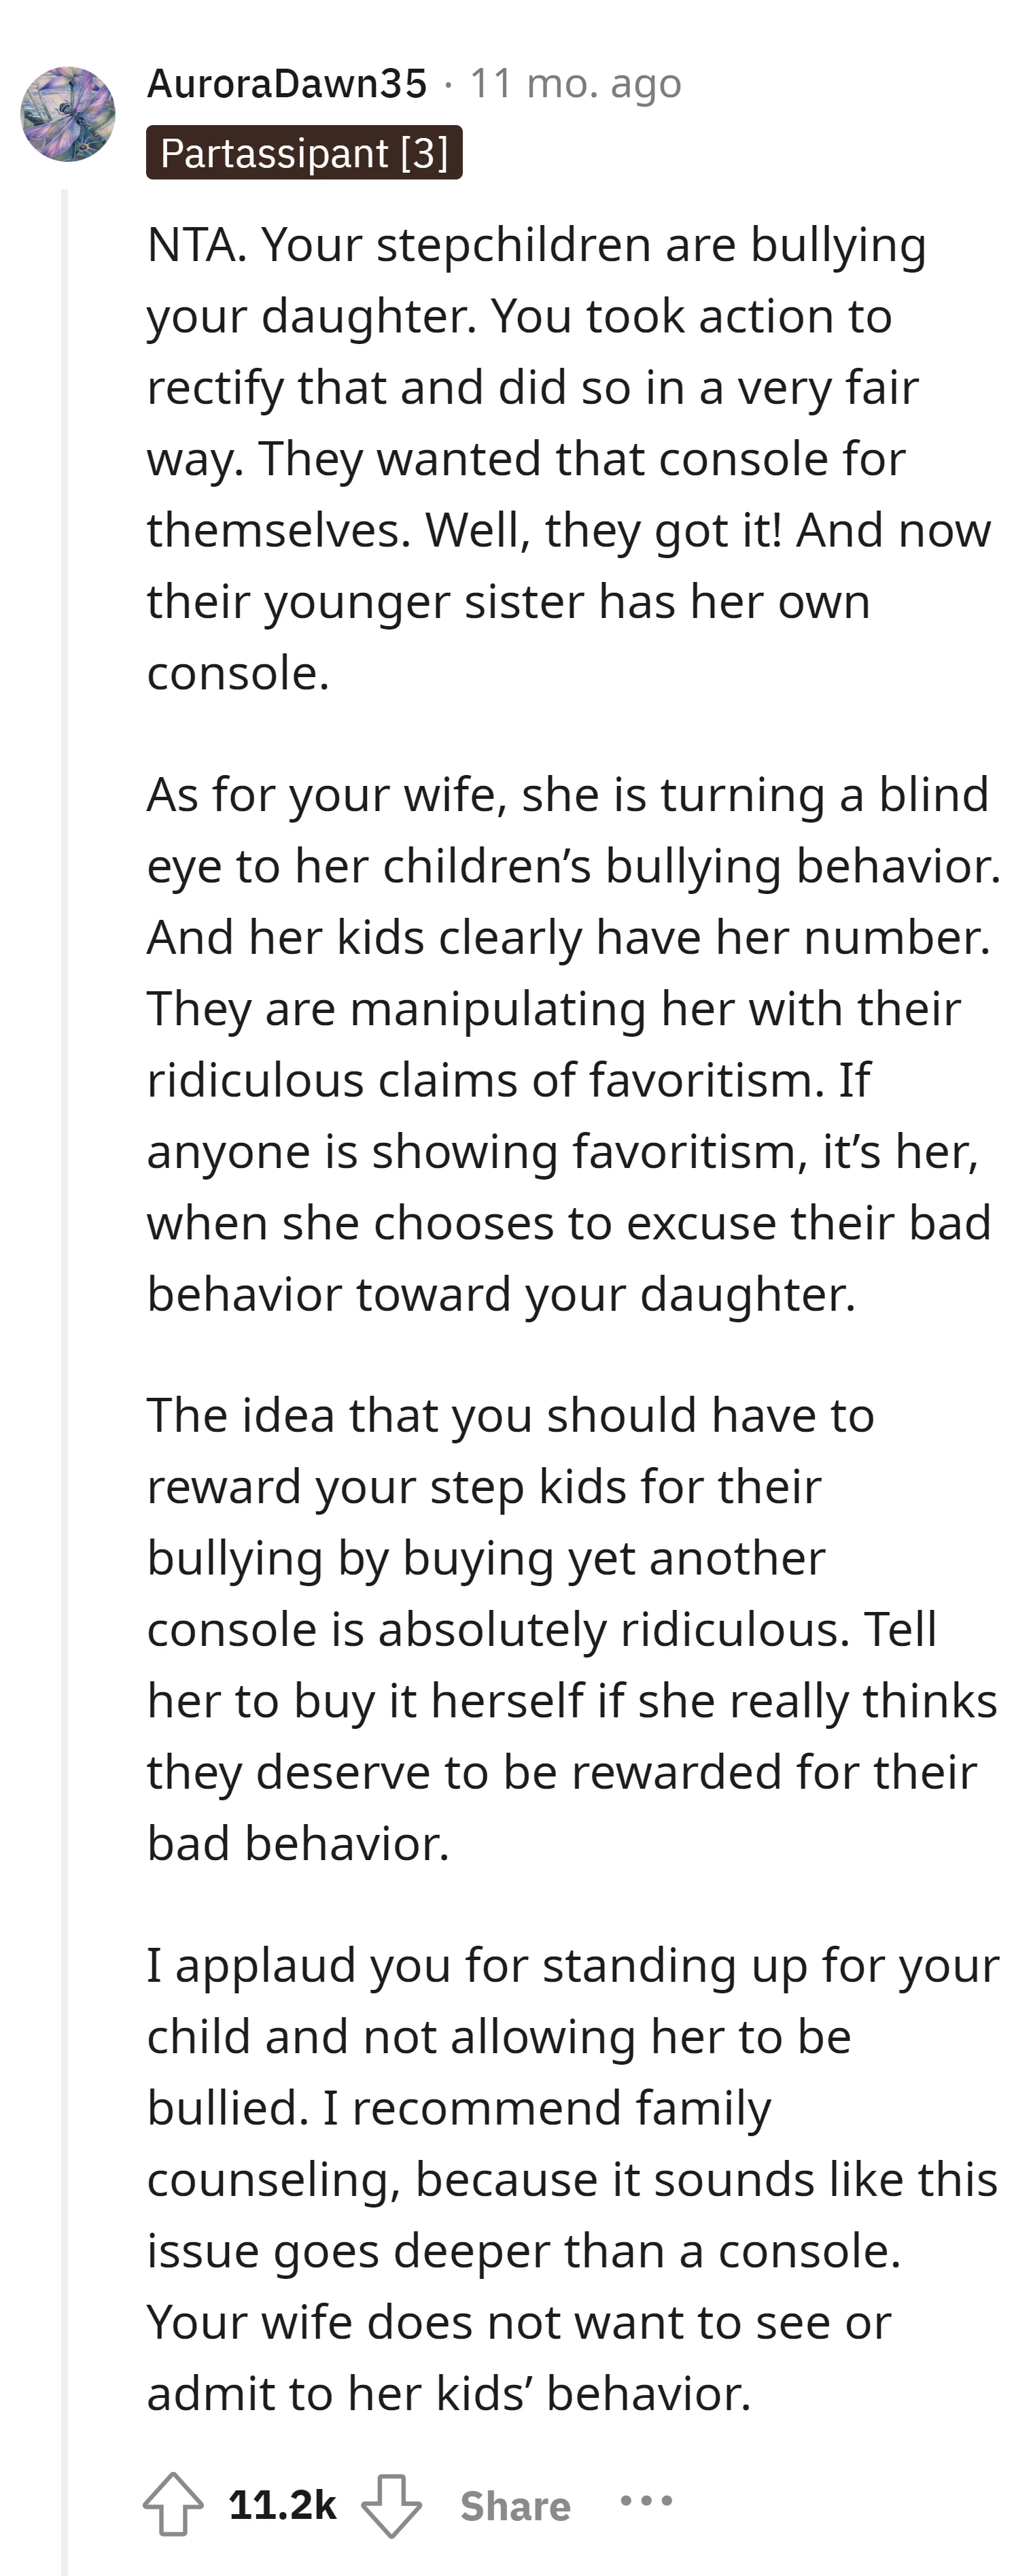 Commenter criticizes the wife for turning a blind eye to her children's bullying behavior